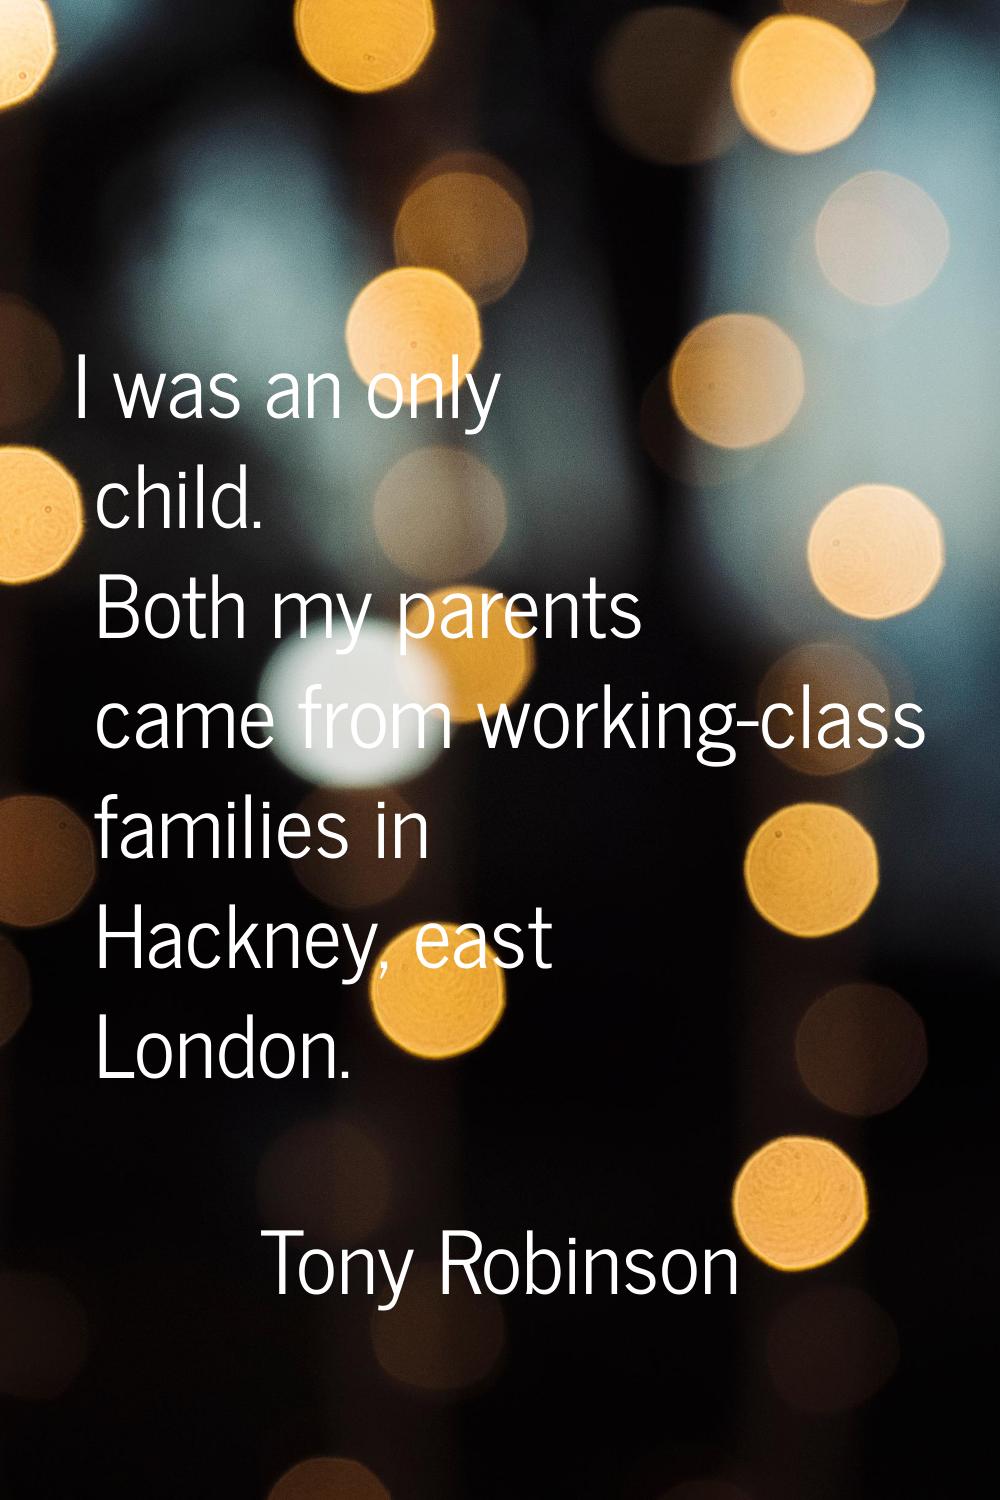 I was an only child. Both my parents came from working-class families in Hackney, east London.